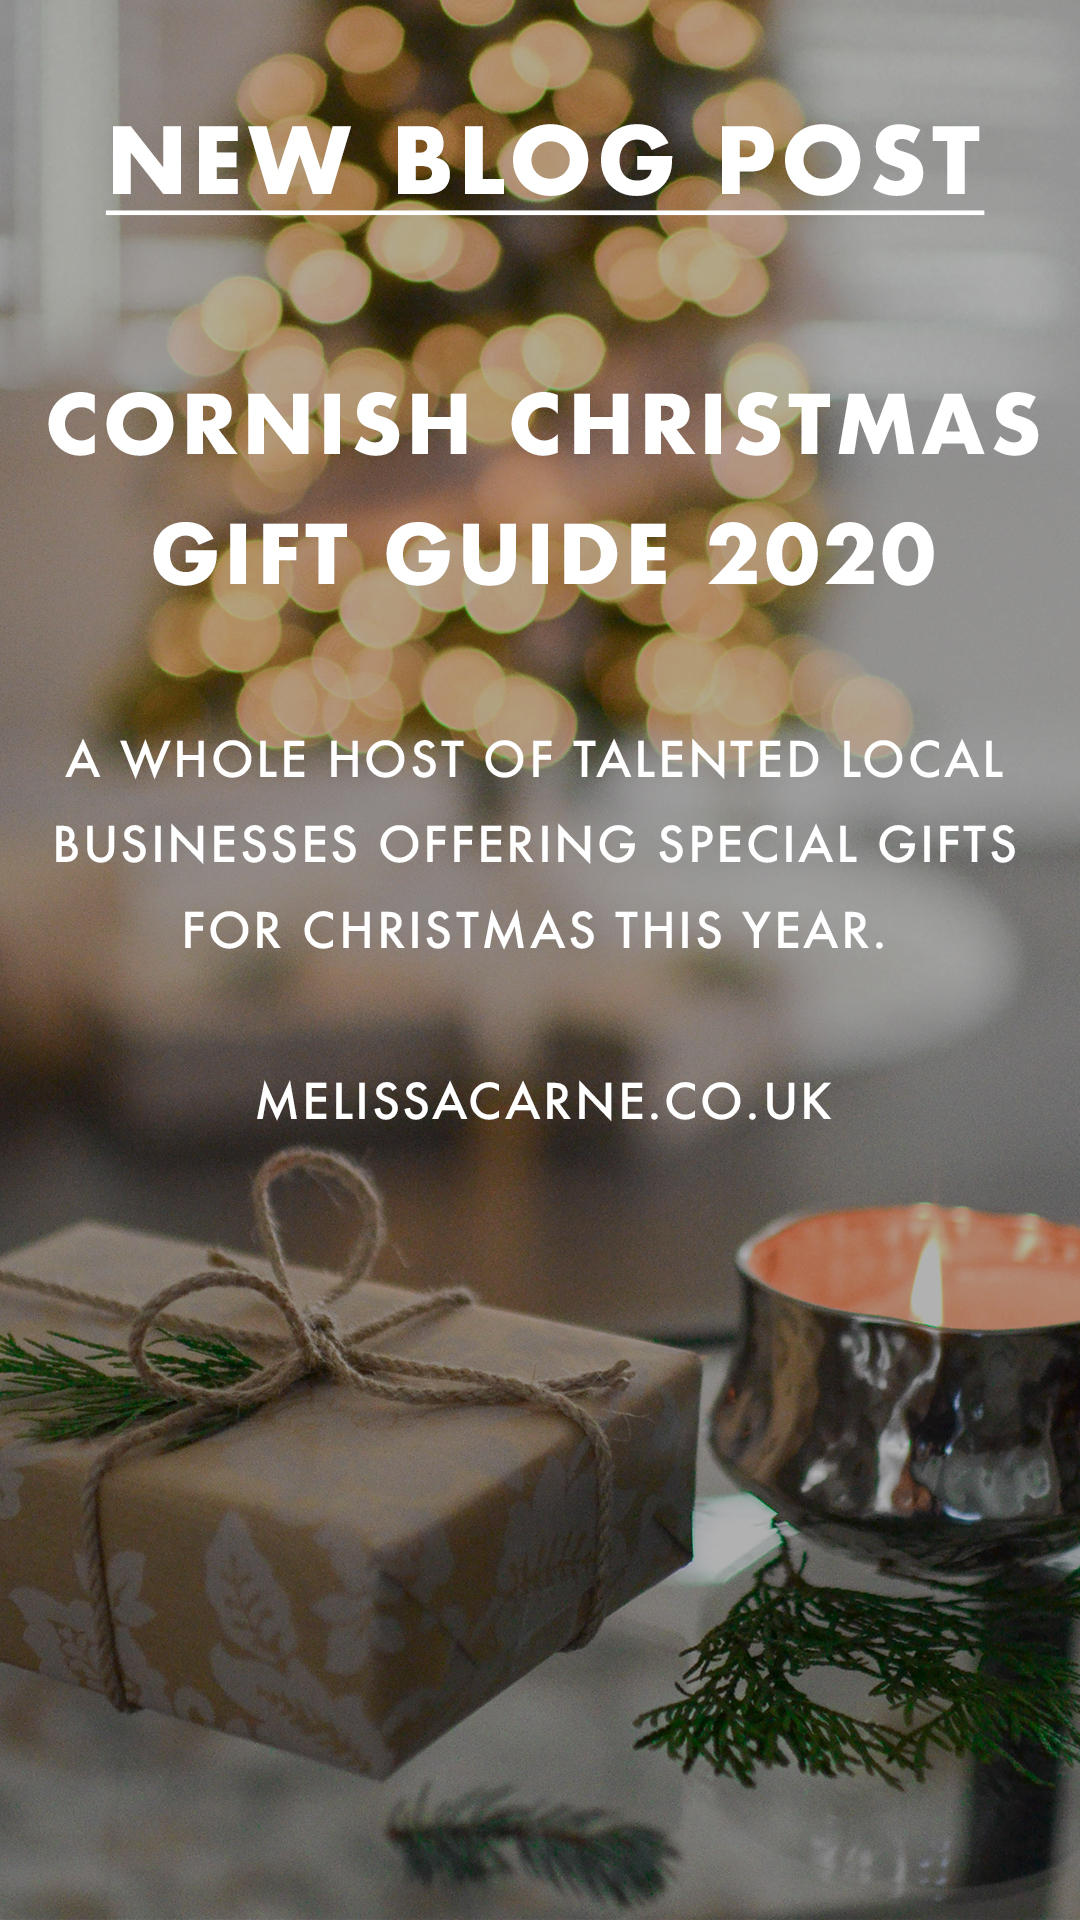 a whole host of talented local cornish businesses offering special gifts for christmas